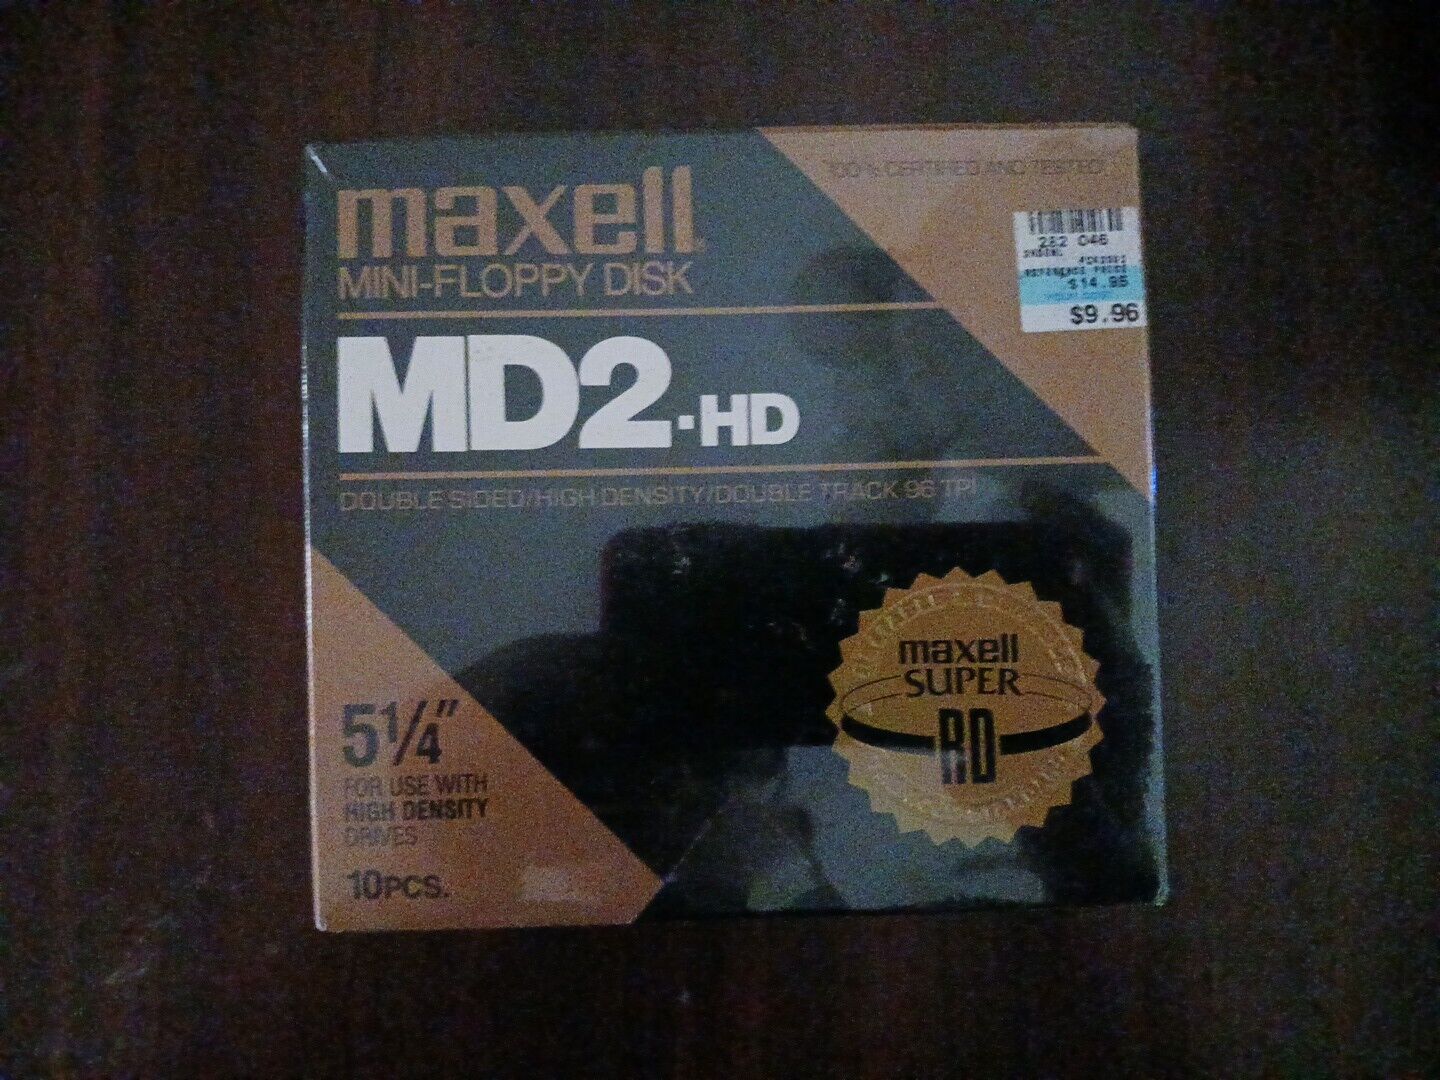 NEW & FACTORY SEALED Maxell MD2-HD Mini-Floppy Disk - 5 1/4